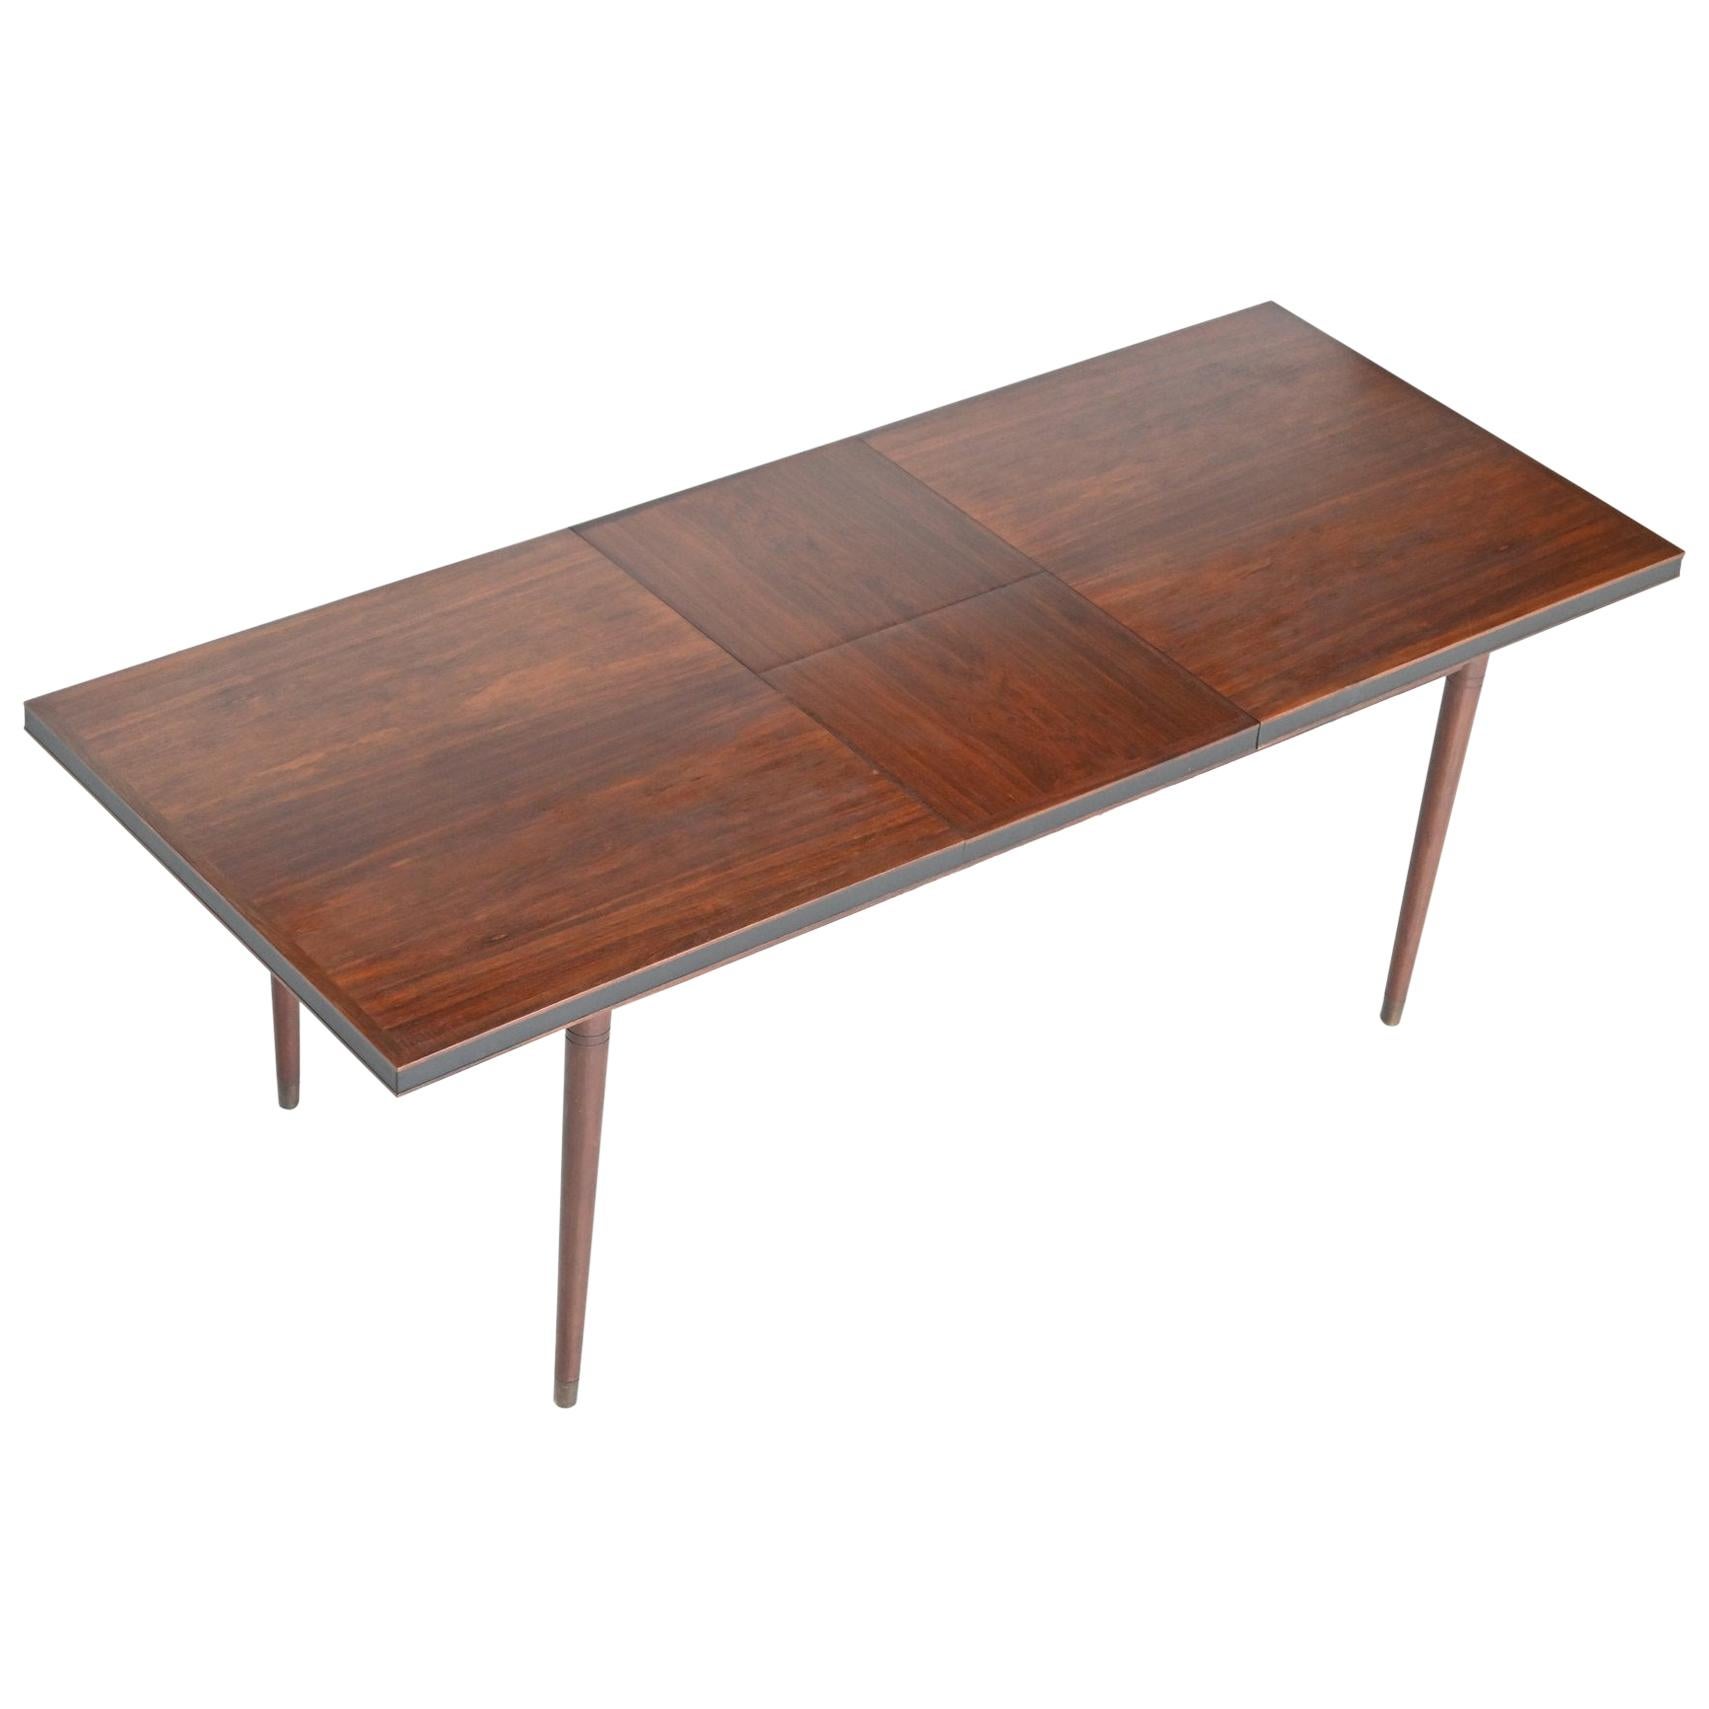 Unusual Extendable Rosewood Dining Table, Denmark, 1960